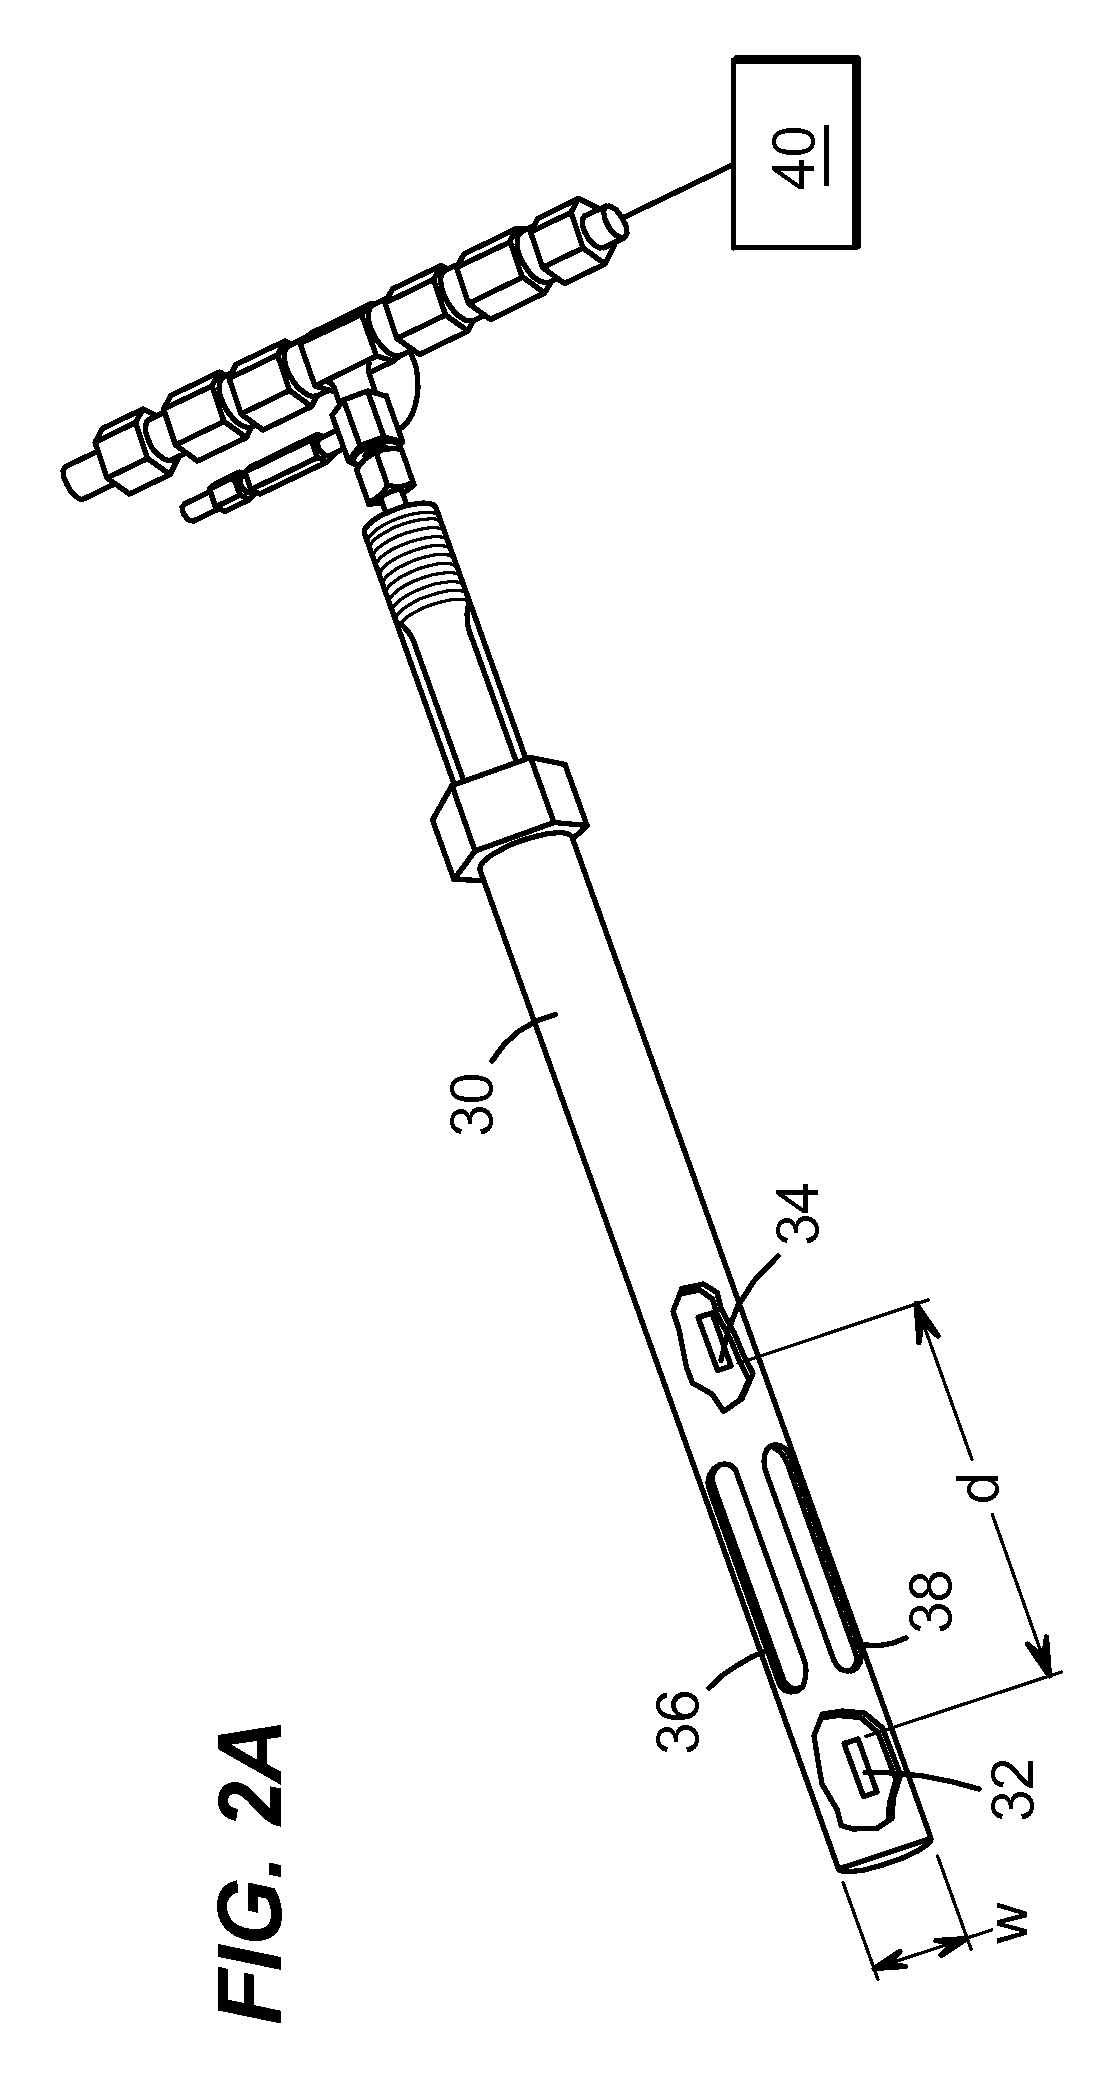 System and method for field calibration of flow meters